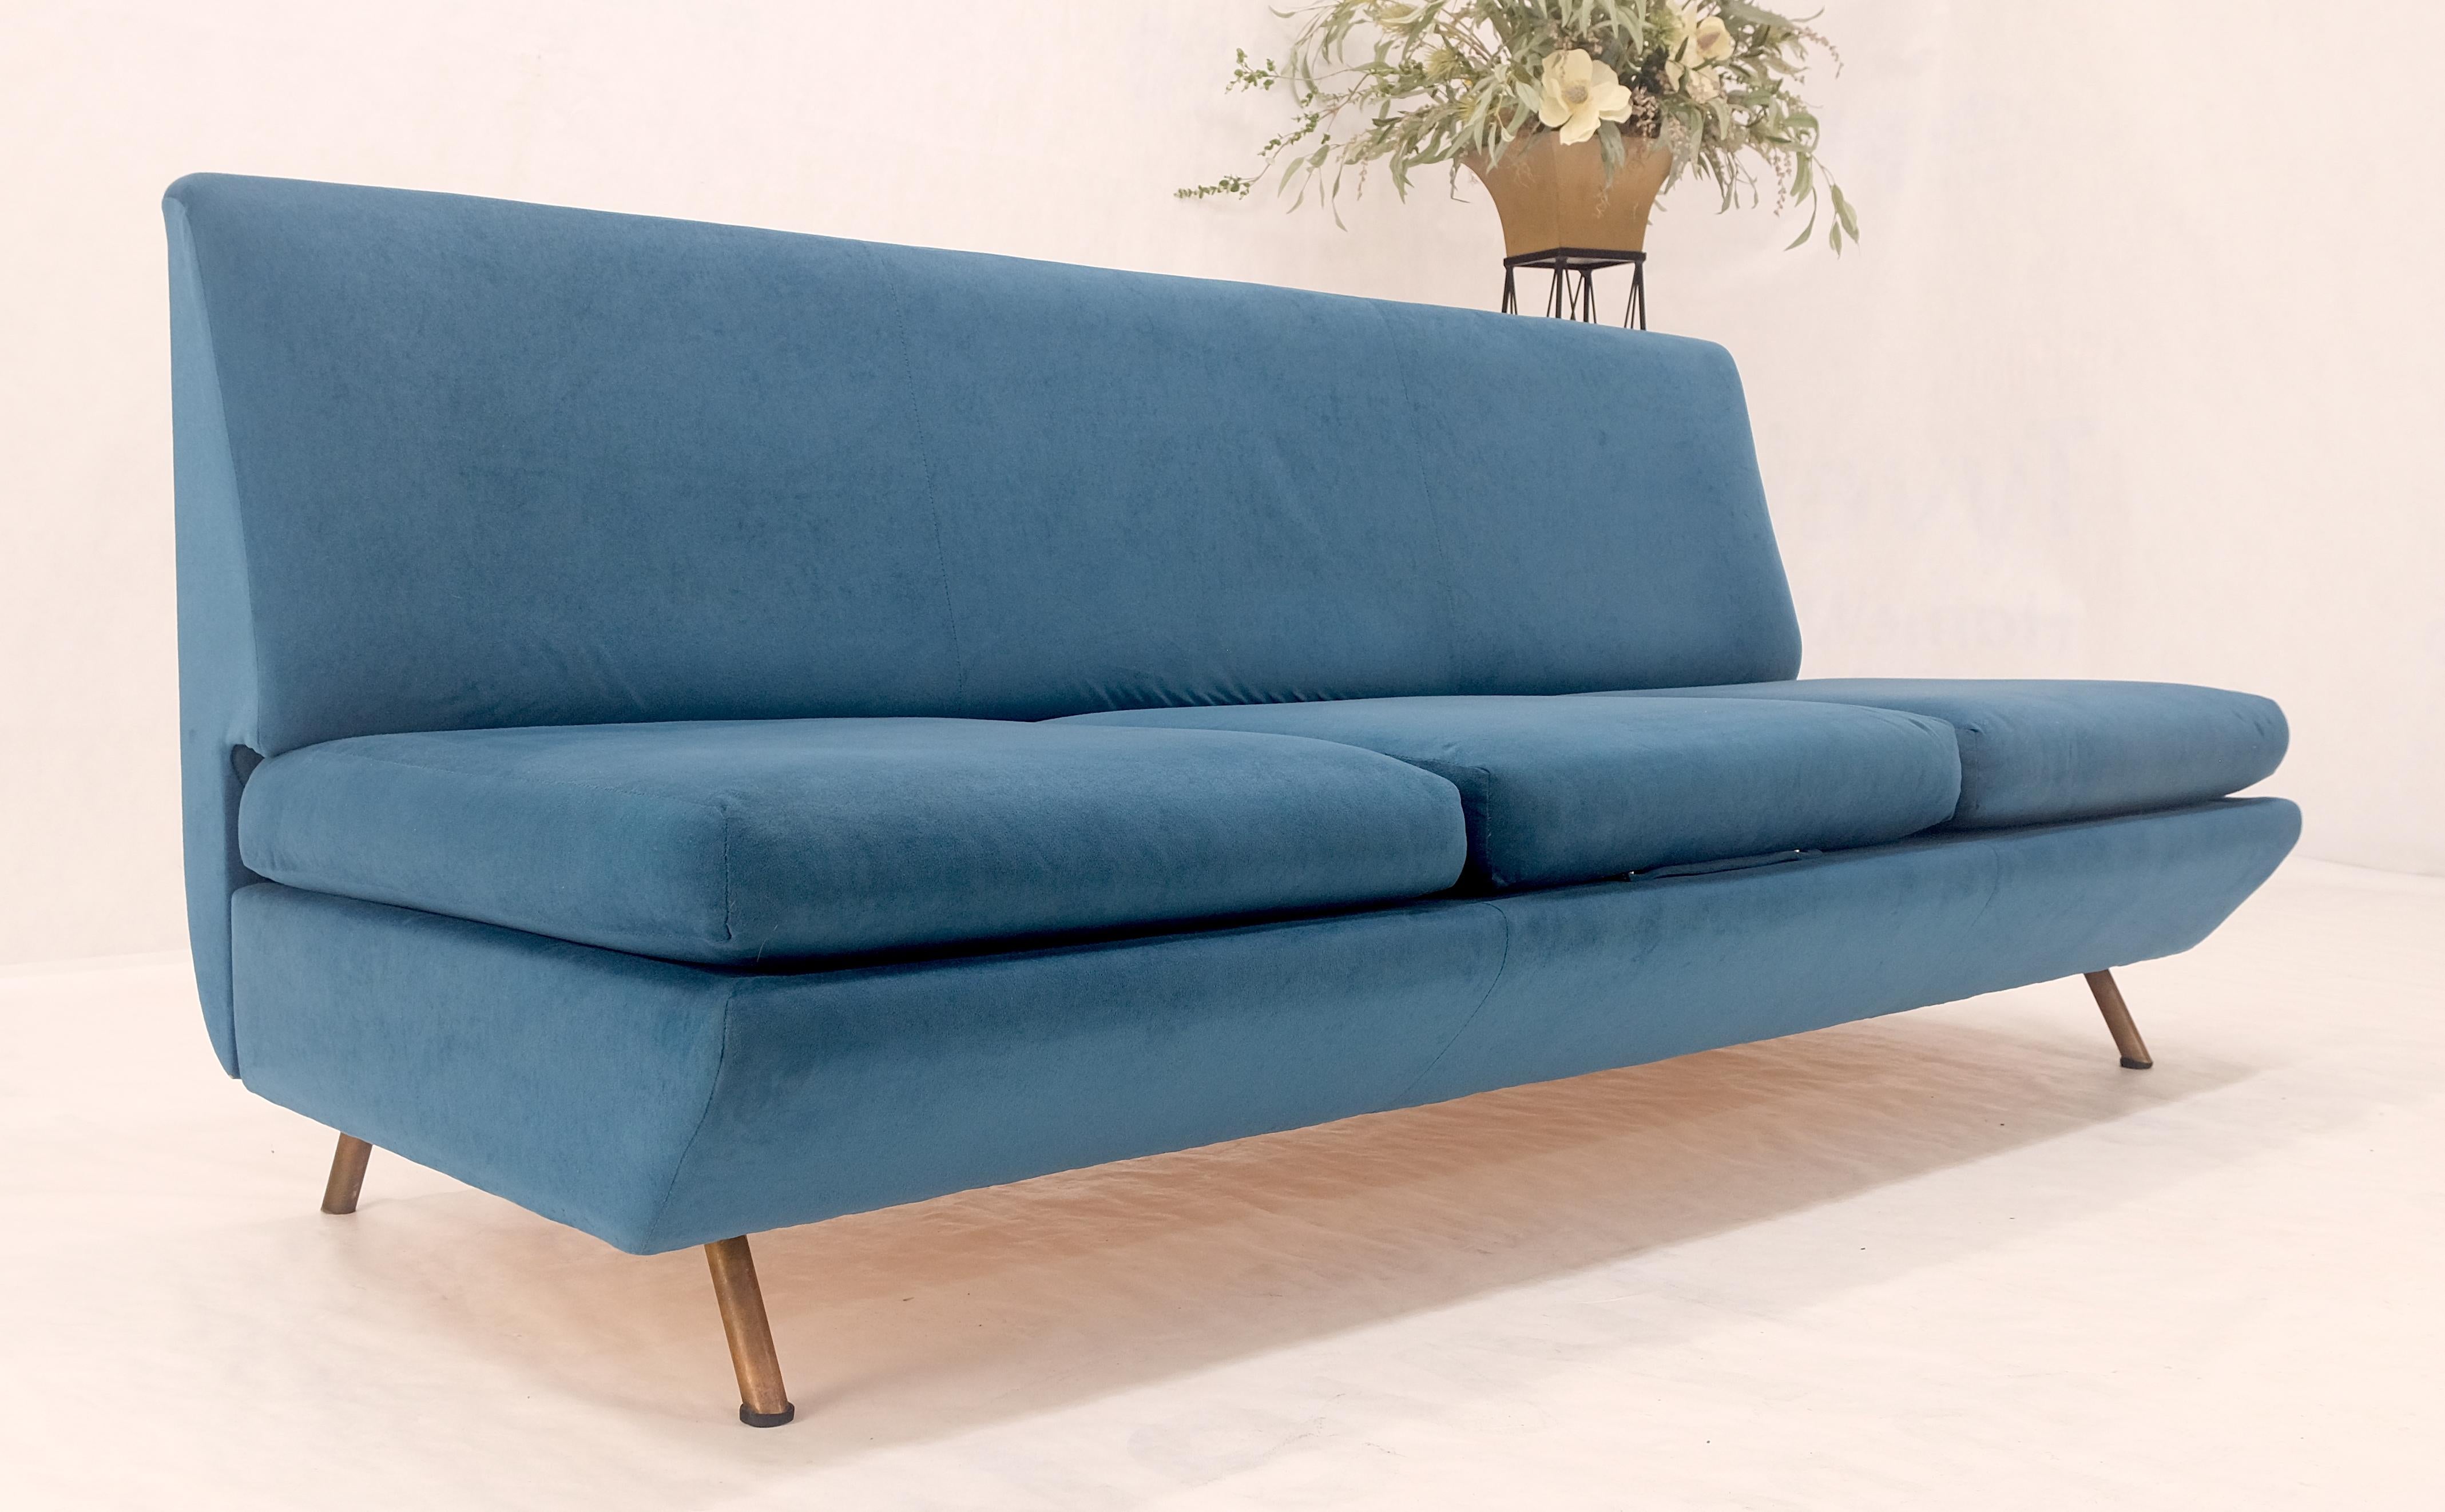 Marco Zanuso Sofa for Arflex Mid Century Italian Modern Teal Upholstery Clean! In Excellent Condition For Sale In Rockaway, NJ